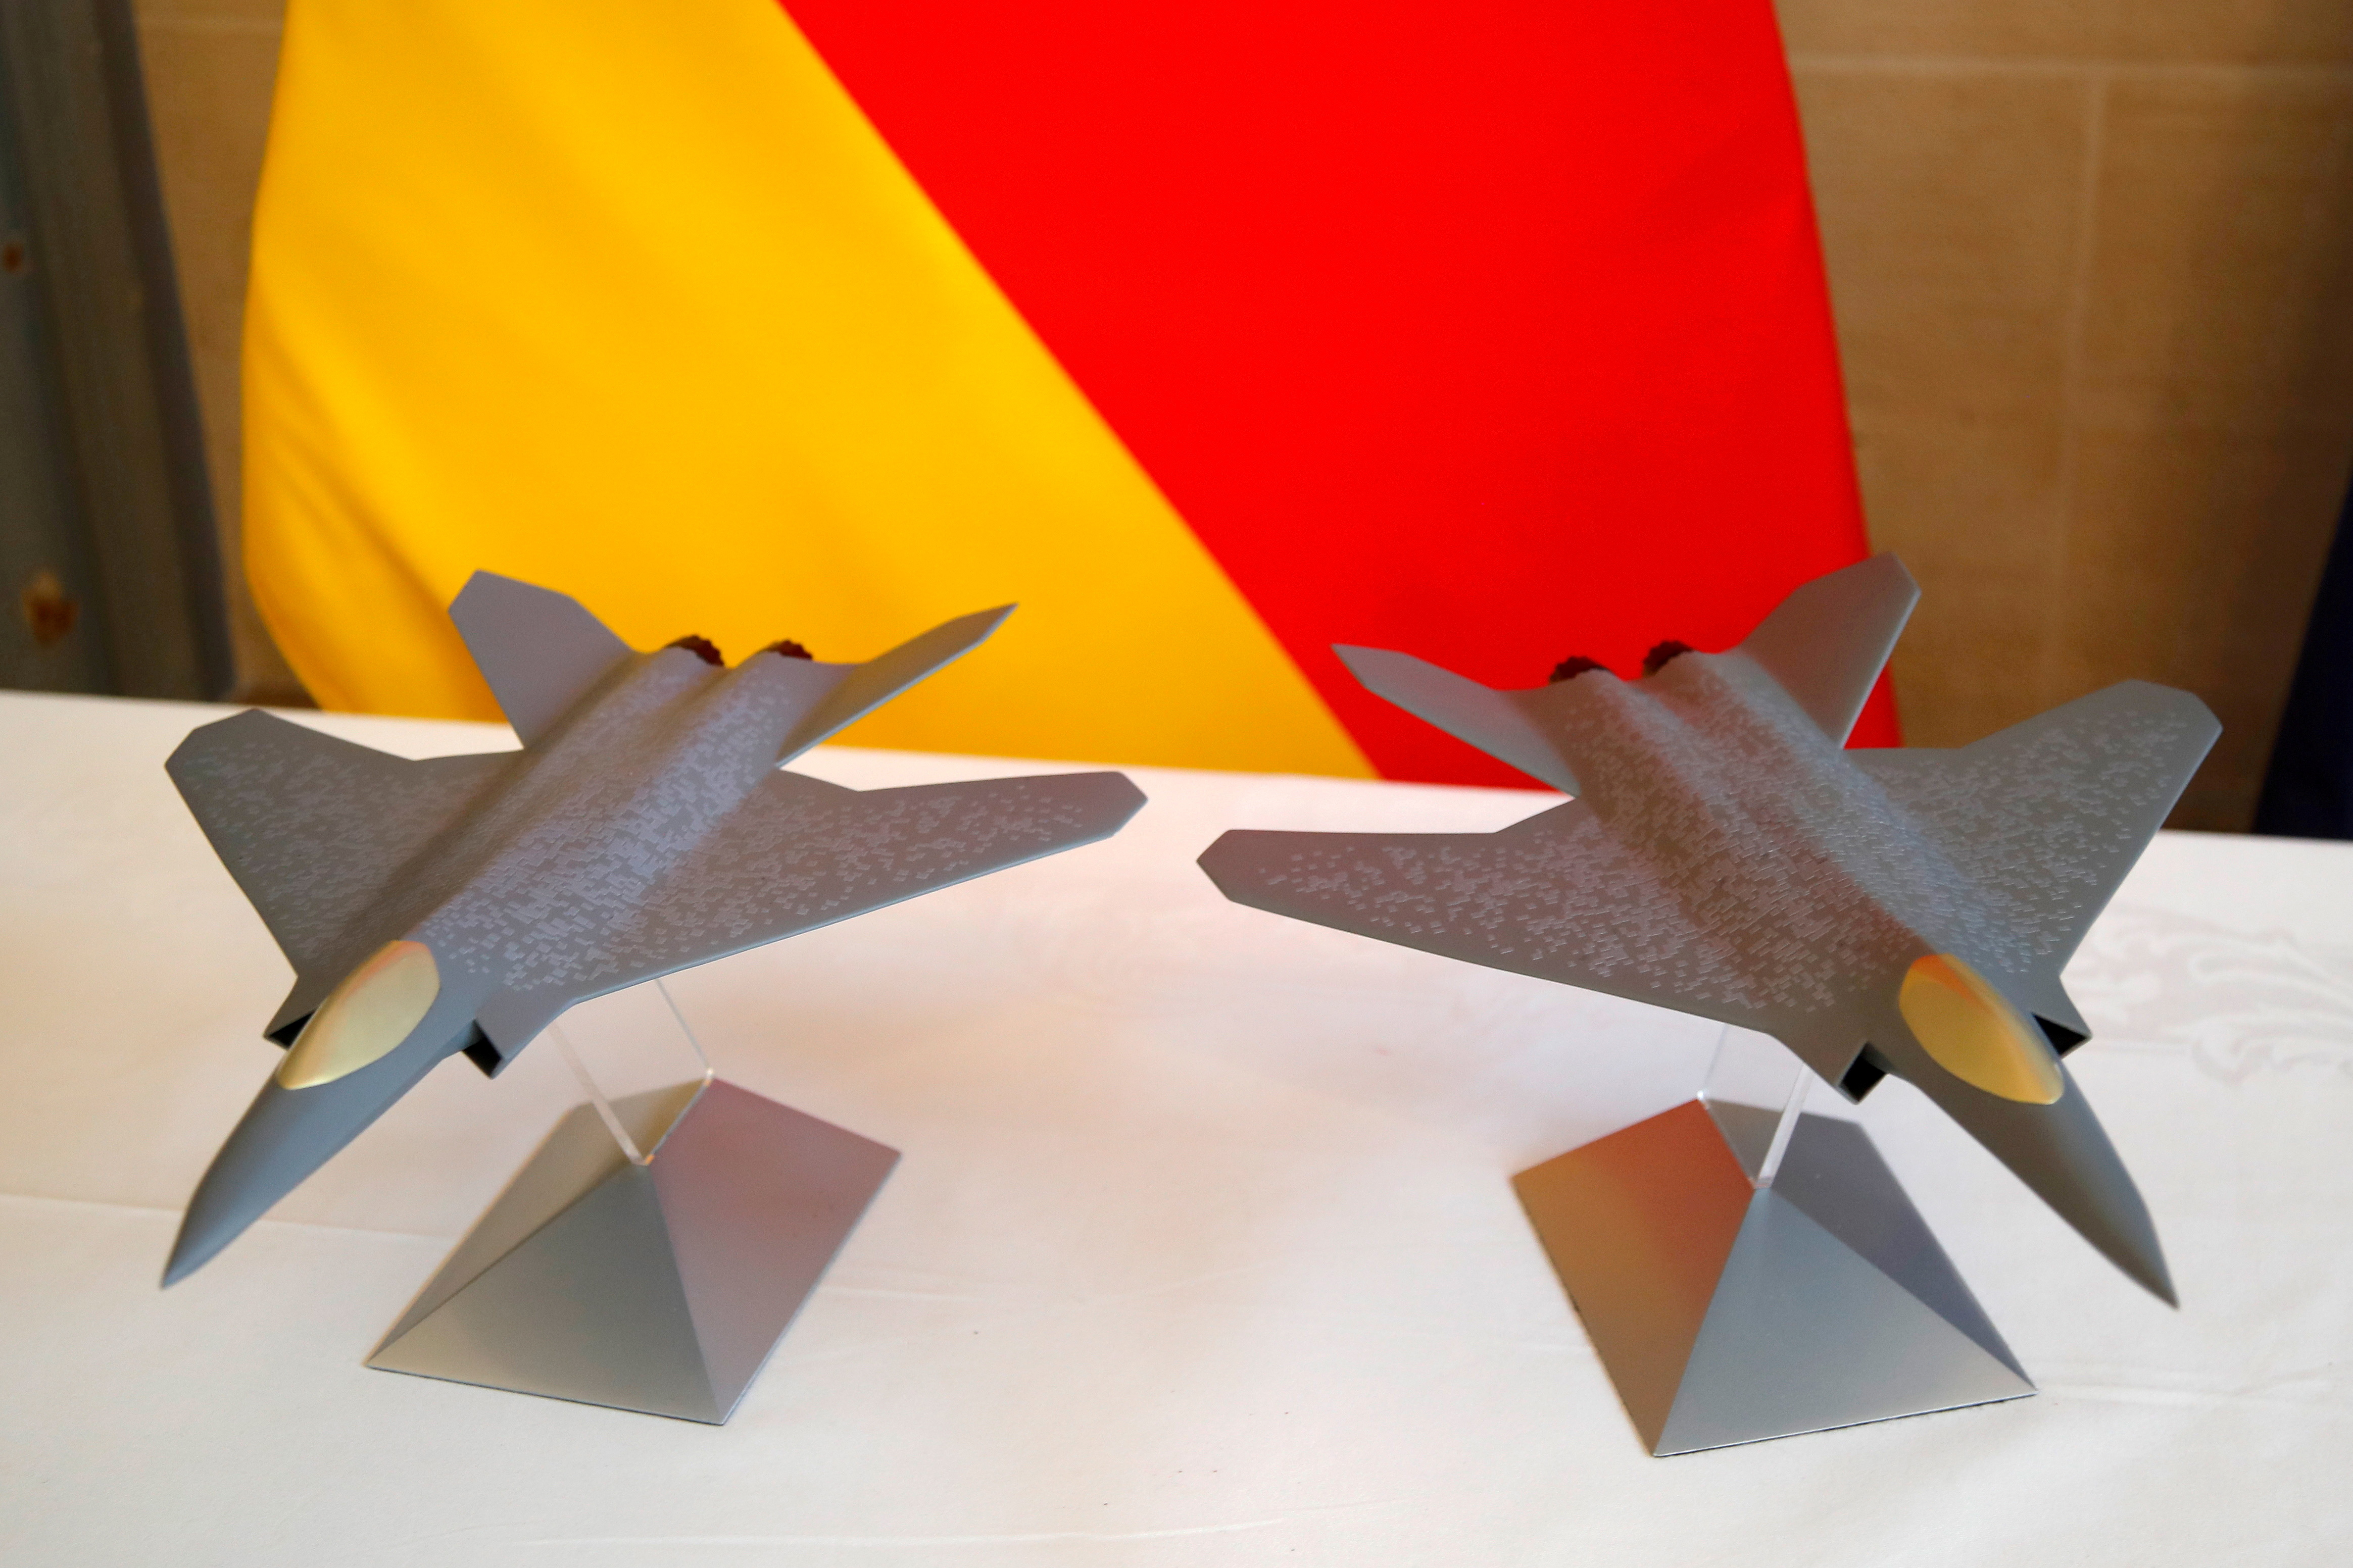 Scale models of the Franco-German-Spanish Future Combat Air System (FCAS), Europe's next-generation fighter jet, are seen in Paris, France, February 20, 2020. REUTERS/Charles Platiau